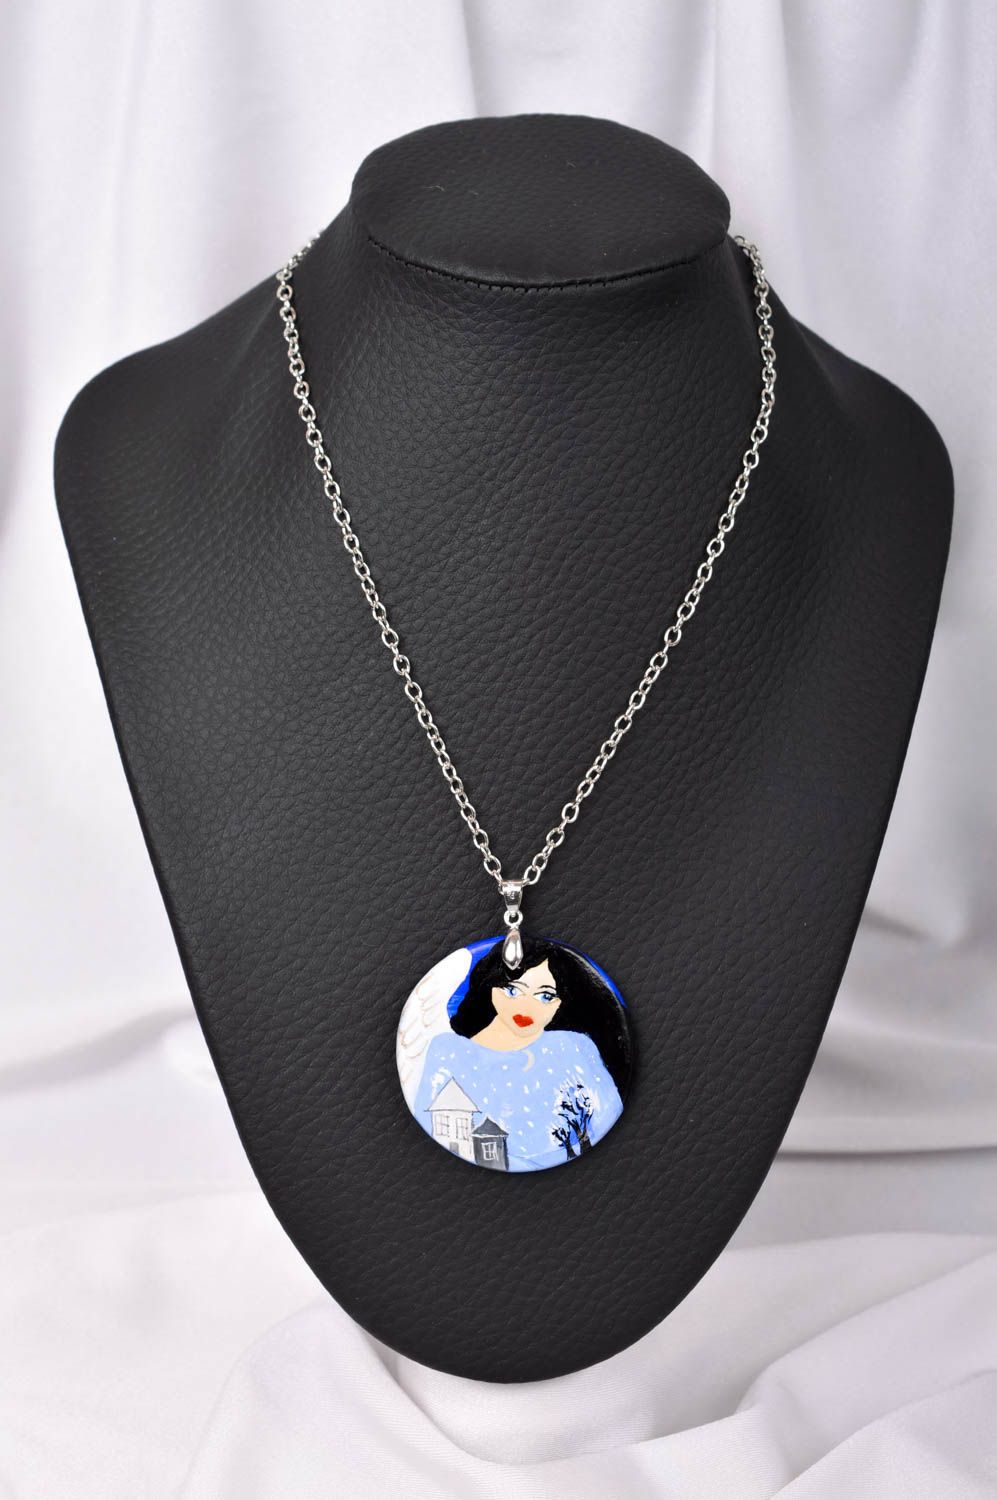 Unusual handmade plastic pendant fashion trends polymer clay ideas gifts for her photo 1